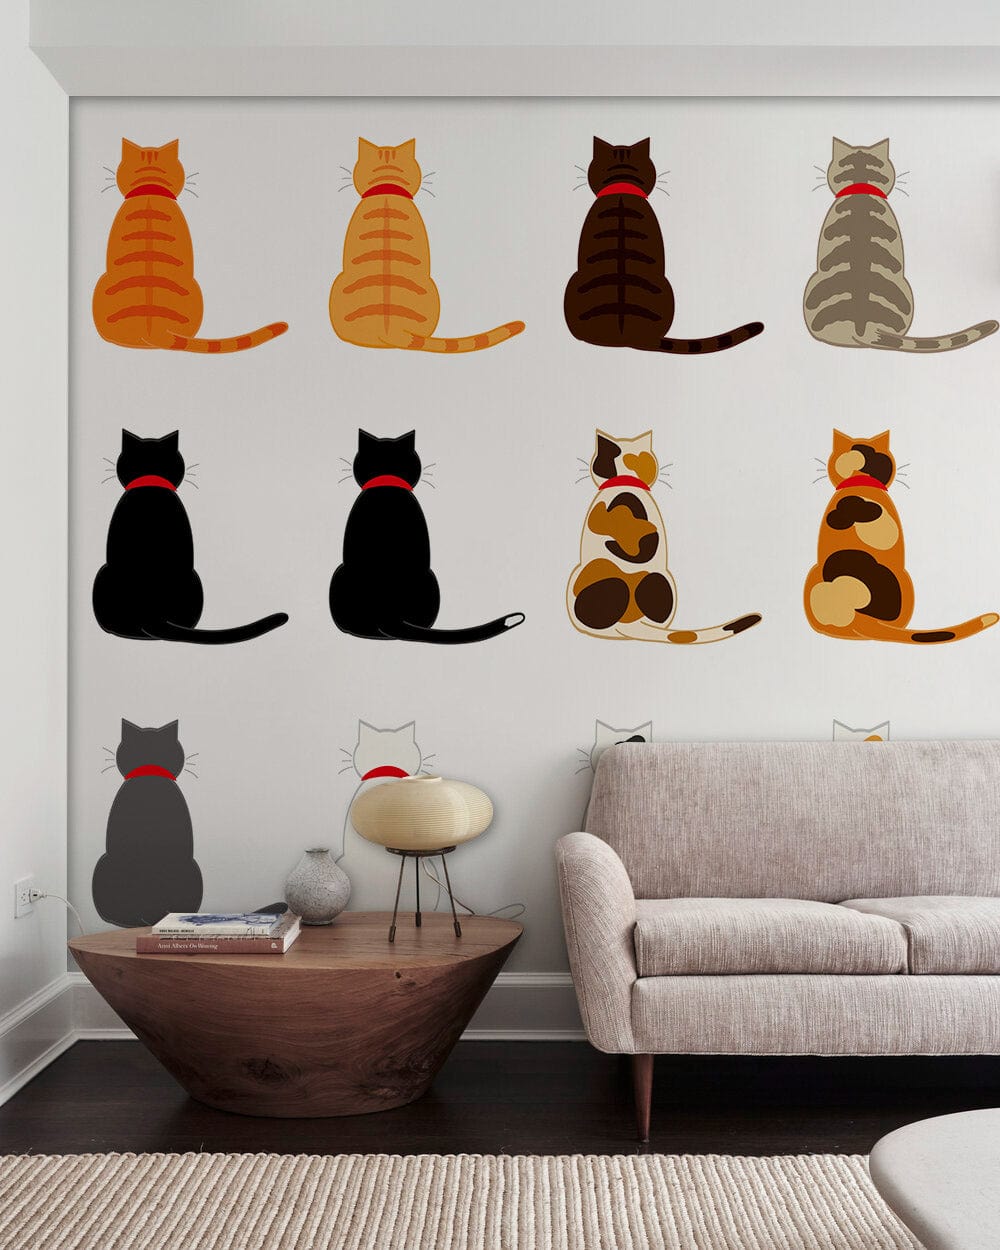 animal cats sit together mural wallpaper